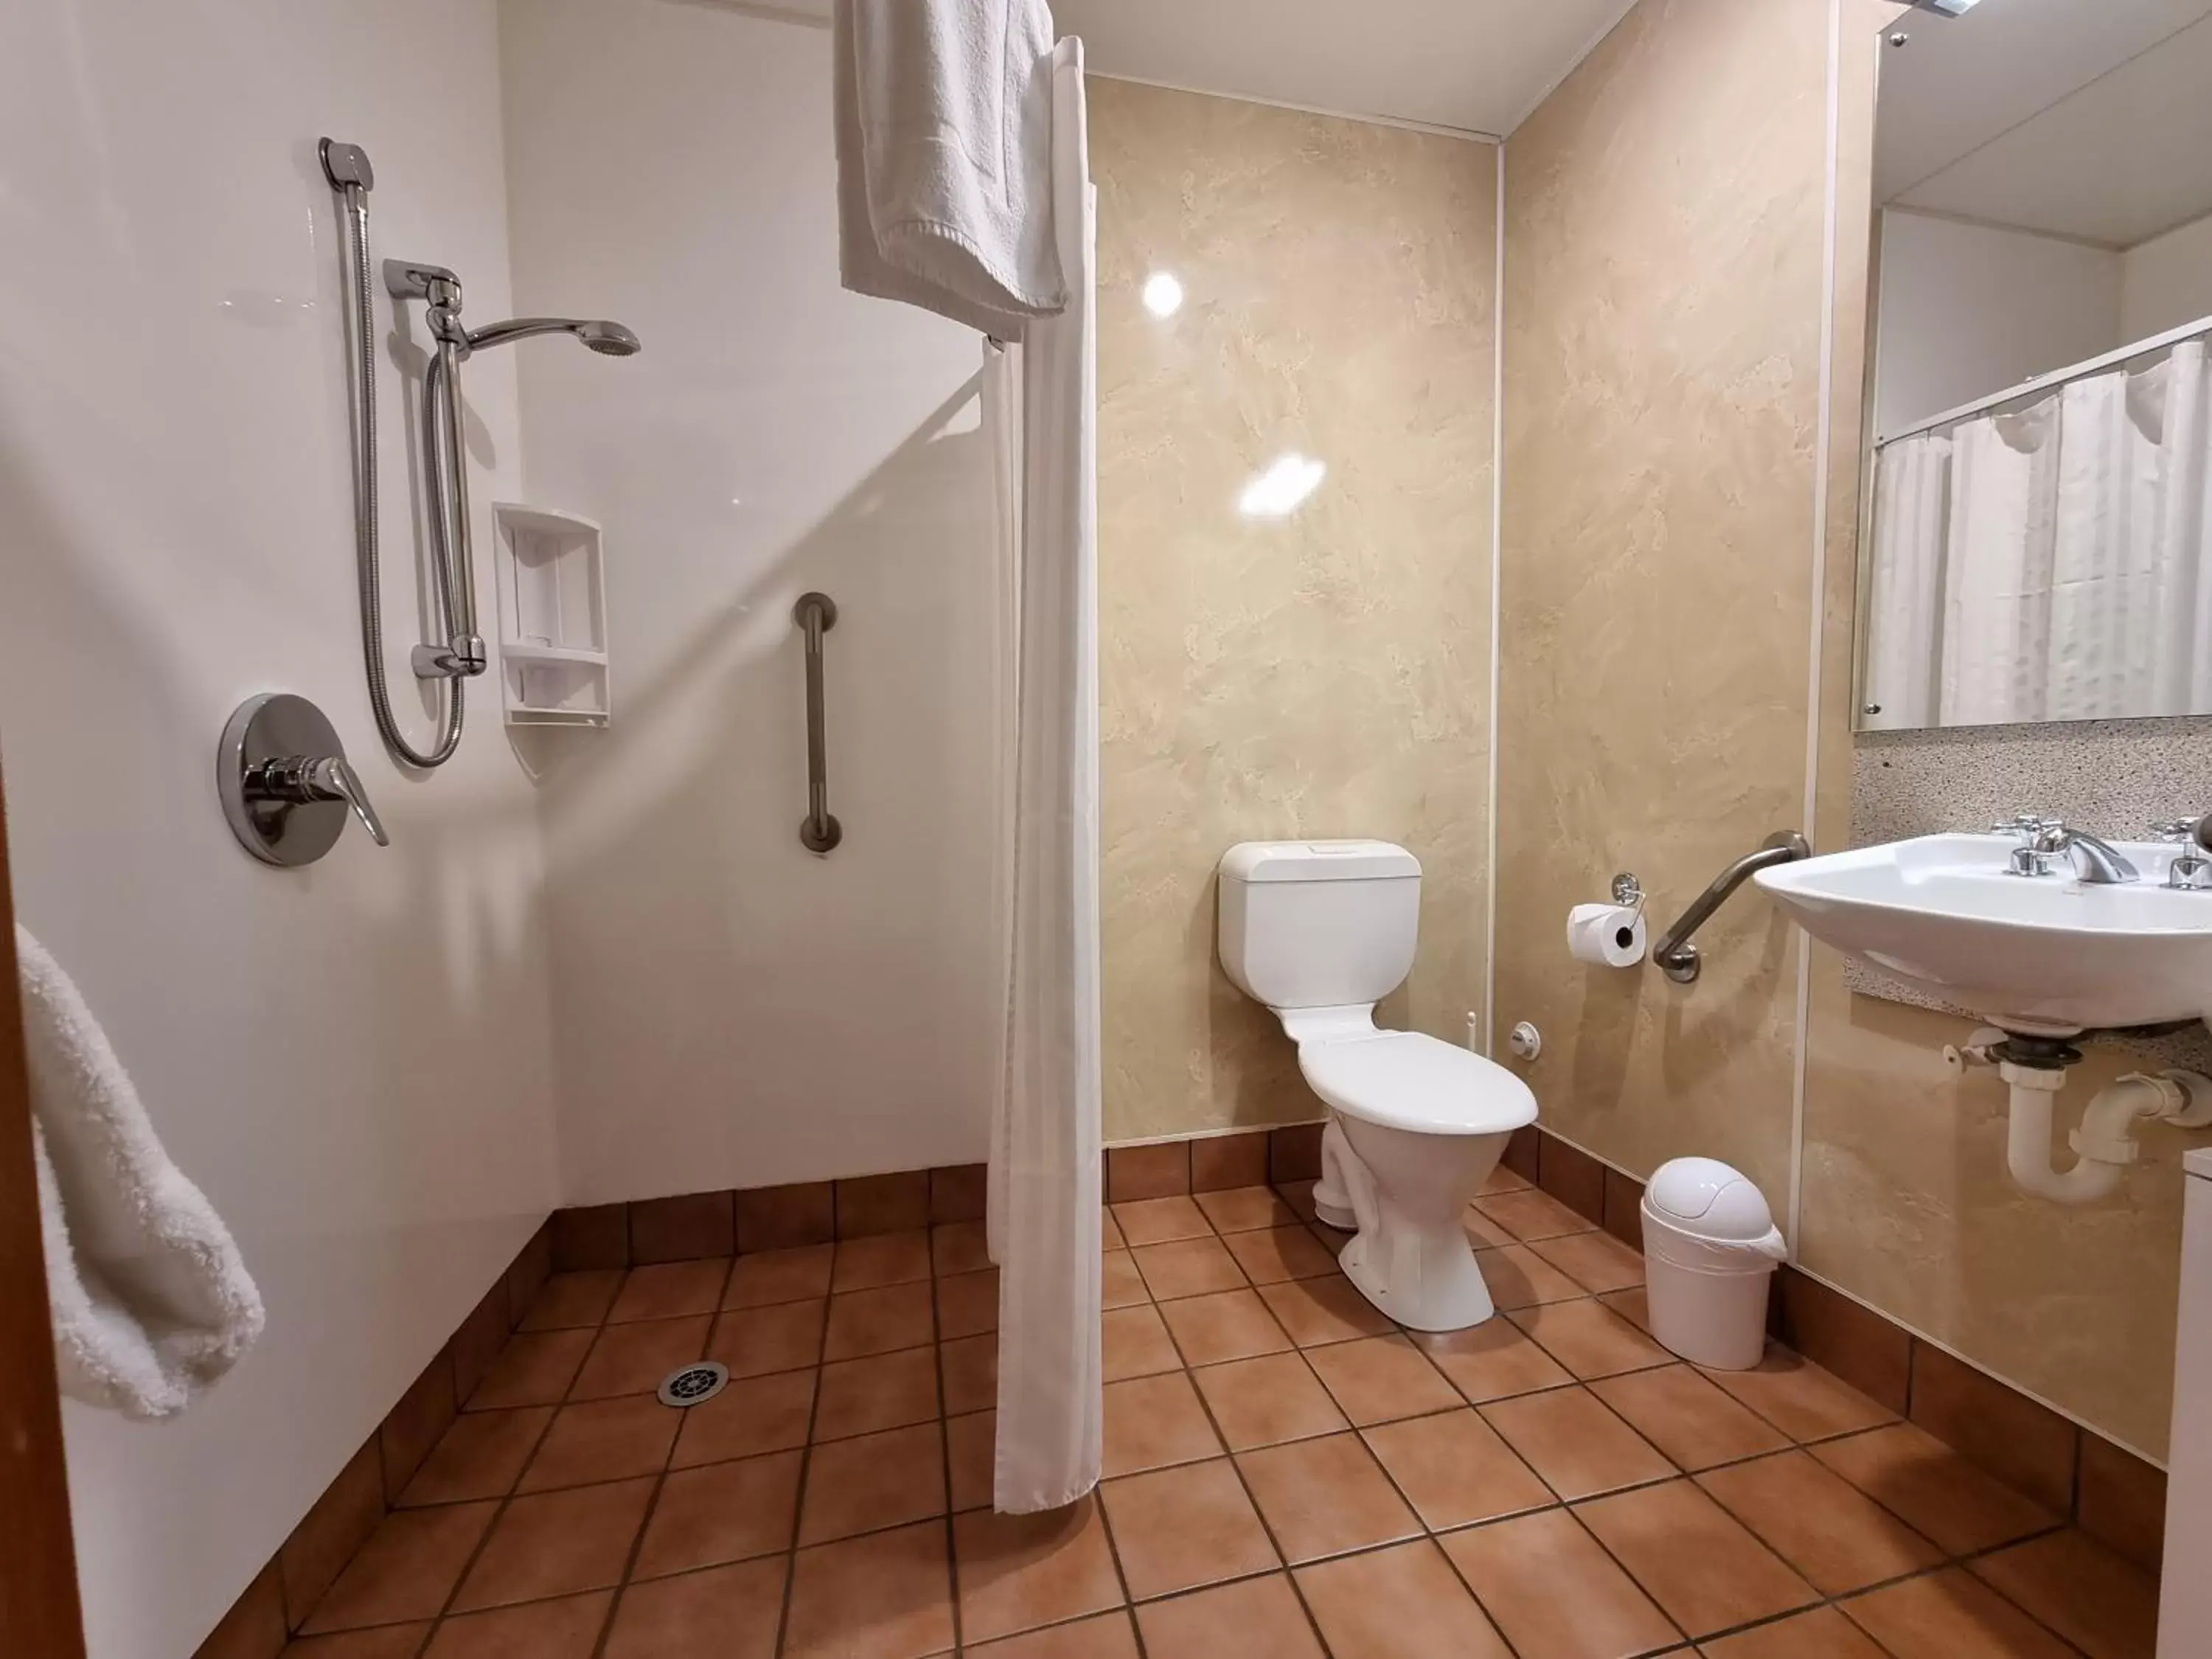 Facility for disabled guests, Bathroom in Amross Court